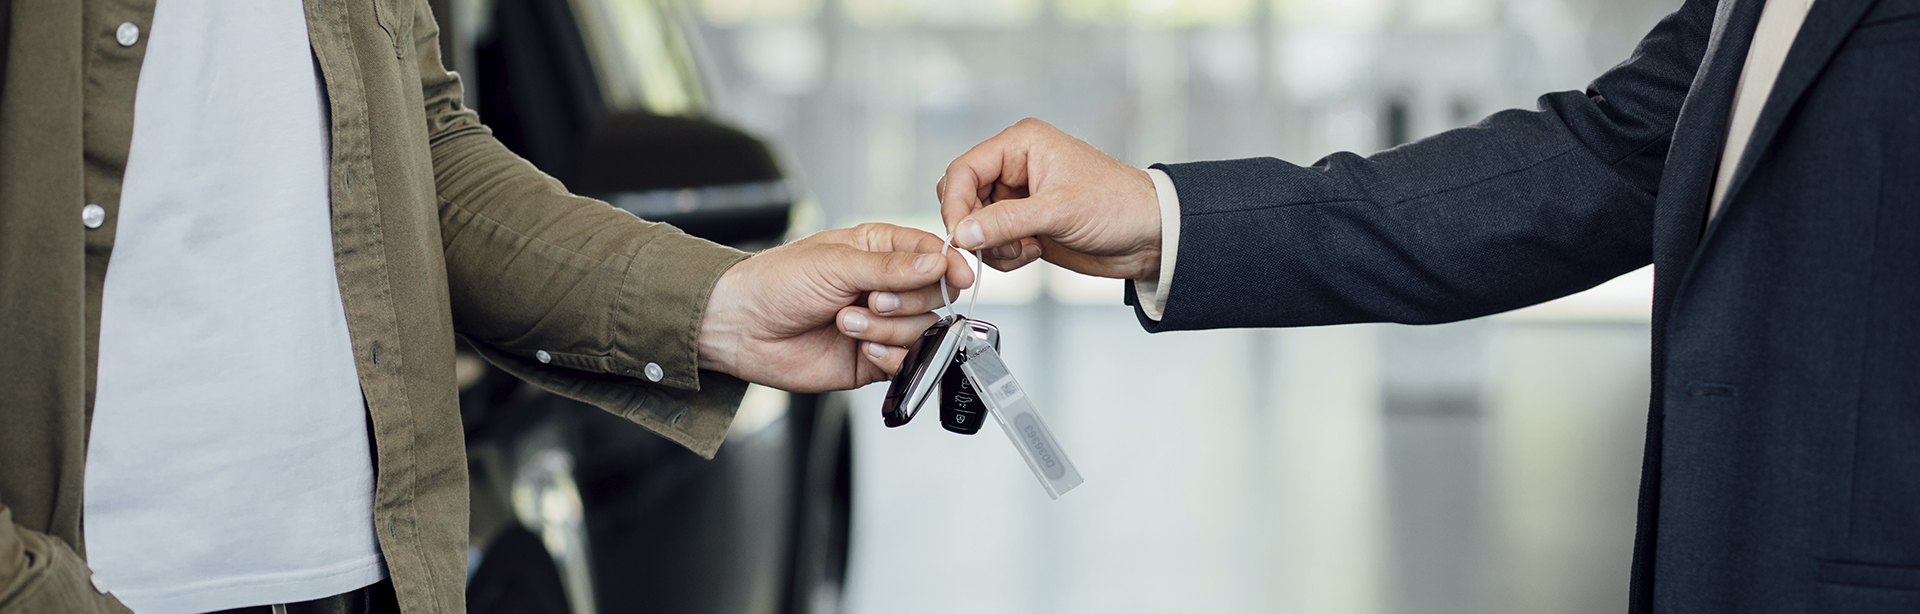 The Benefits of Selling Your Used Car to a Dealer